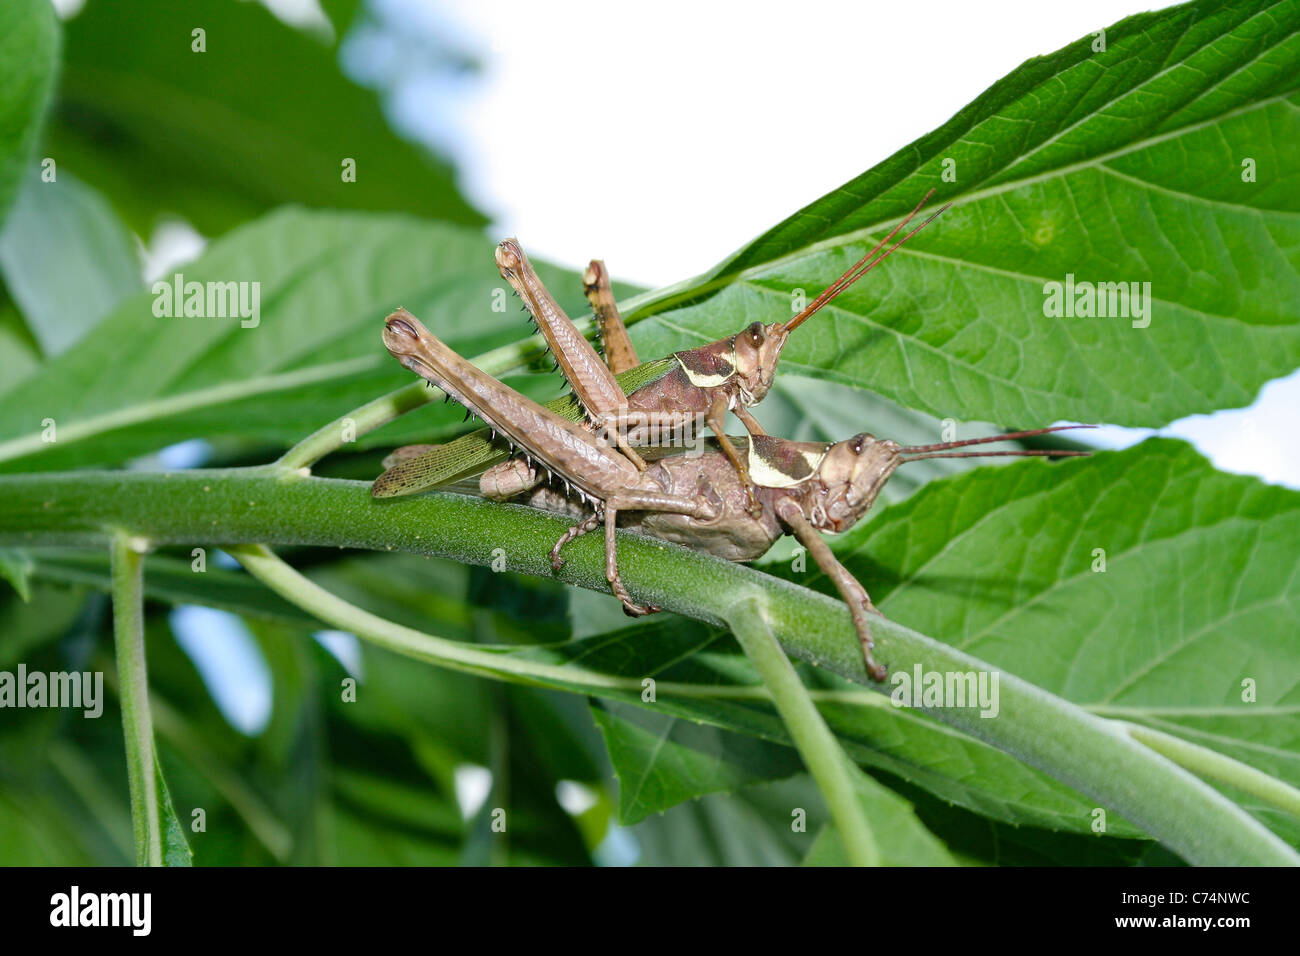 Grasshopper (Coryacris angustipennis), a pair of grasshoppers  mating on leaf branch, Asuncion, Paraguay Stock Photo